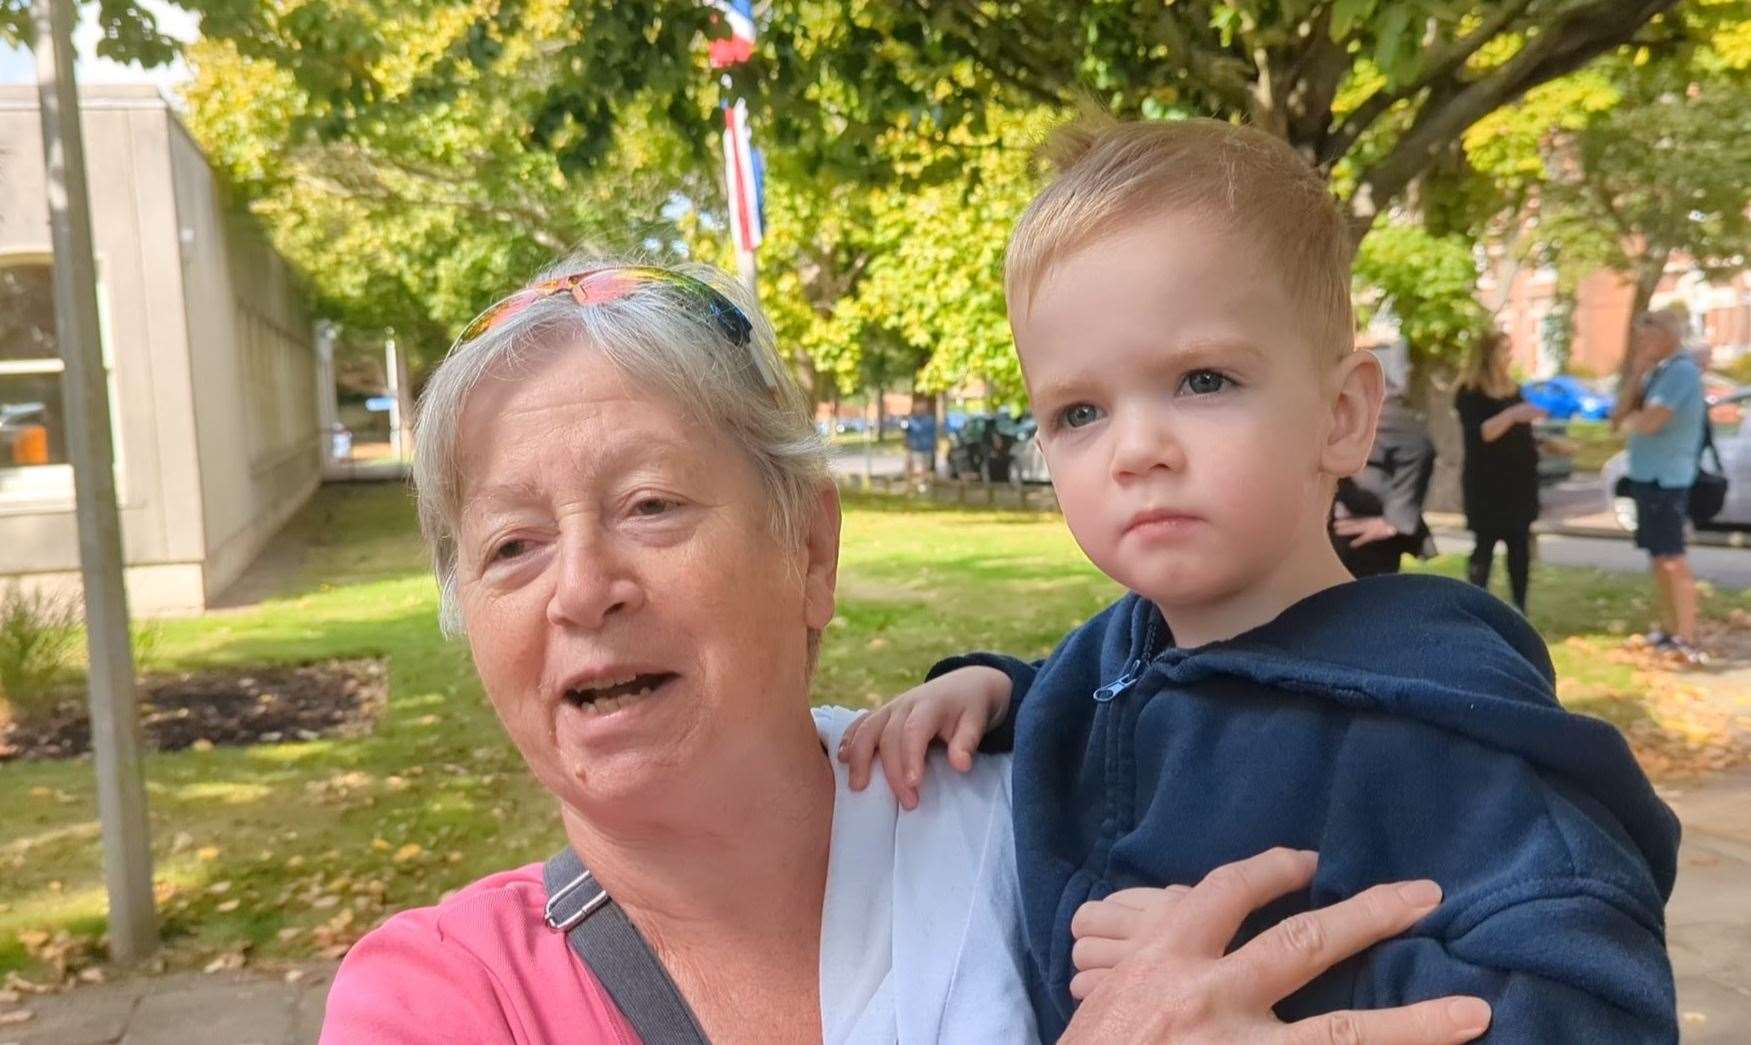 Shelagh Wright, of Whitfield, attended the Accession Proclamation in Folkestone with her grandson James